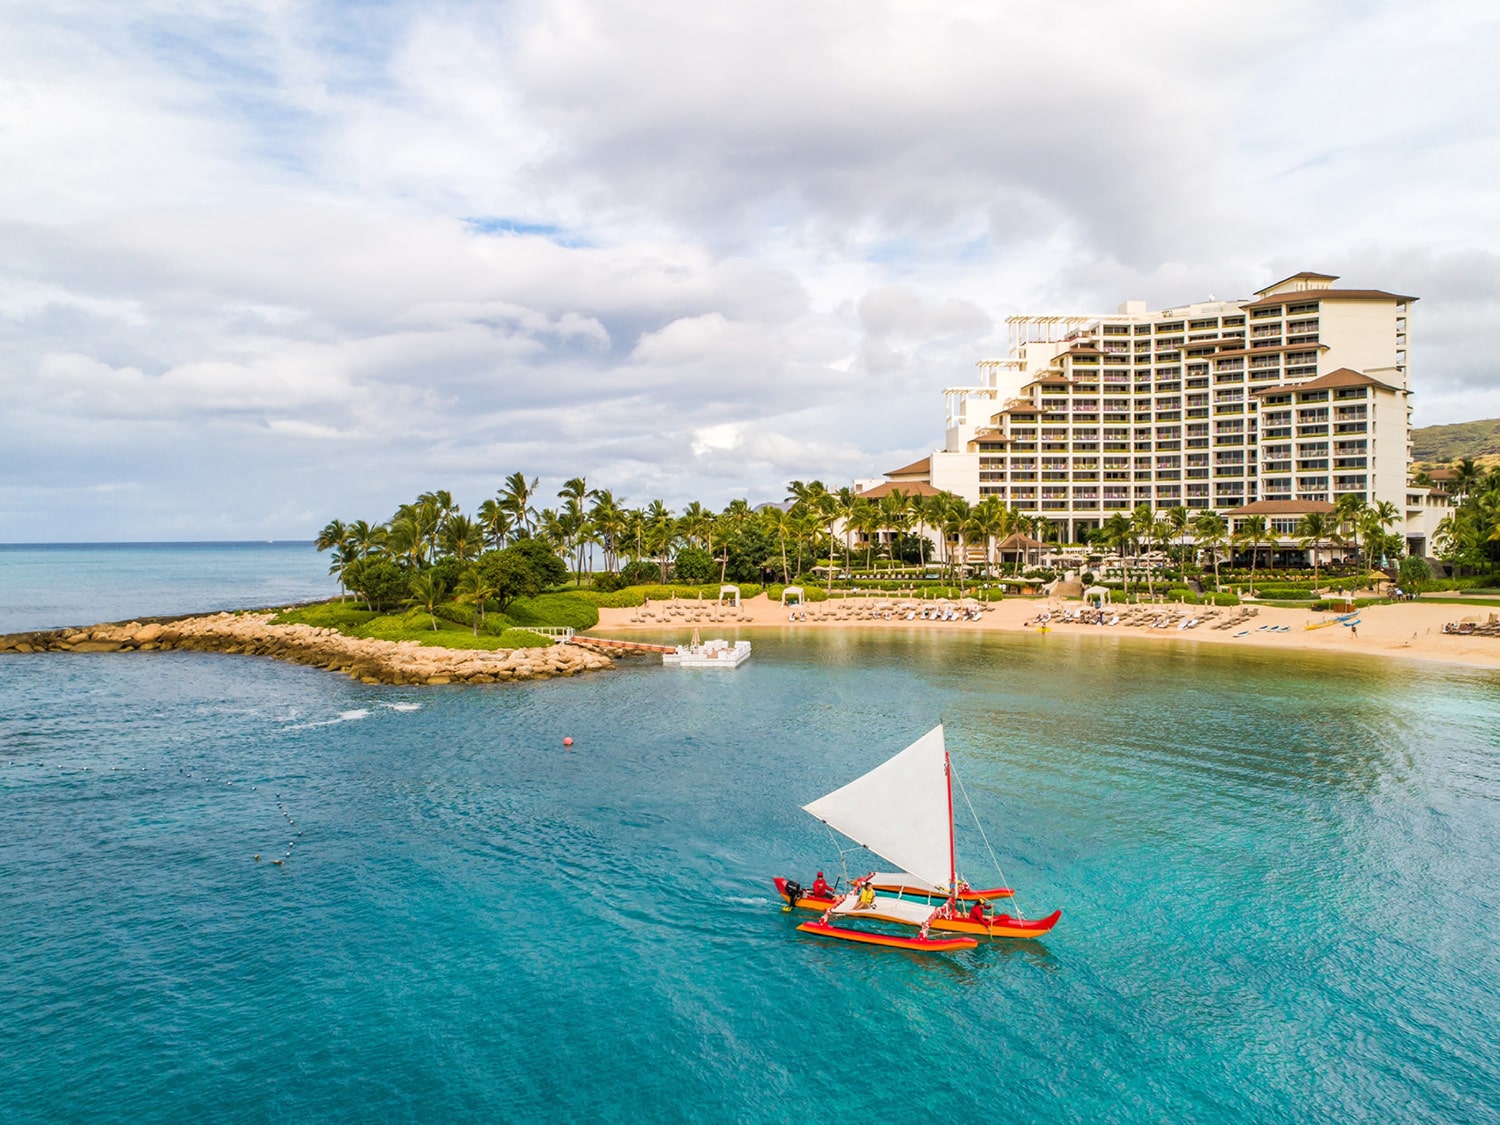 An outrigger canoe passes in front of The Four Seasons Resort at Ko Olina.